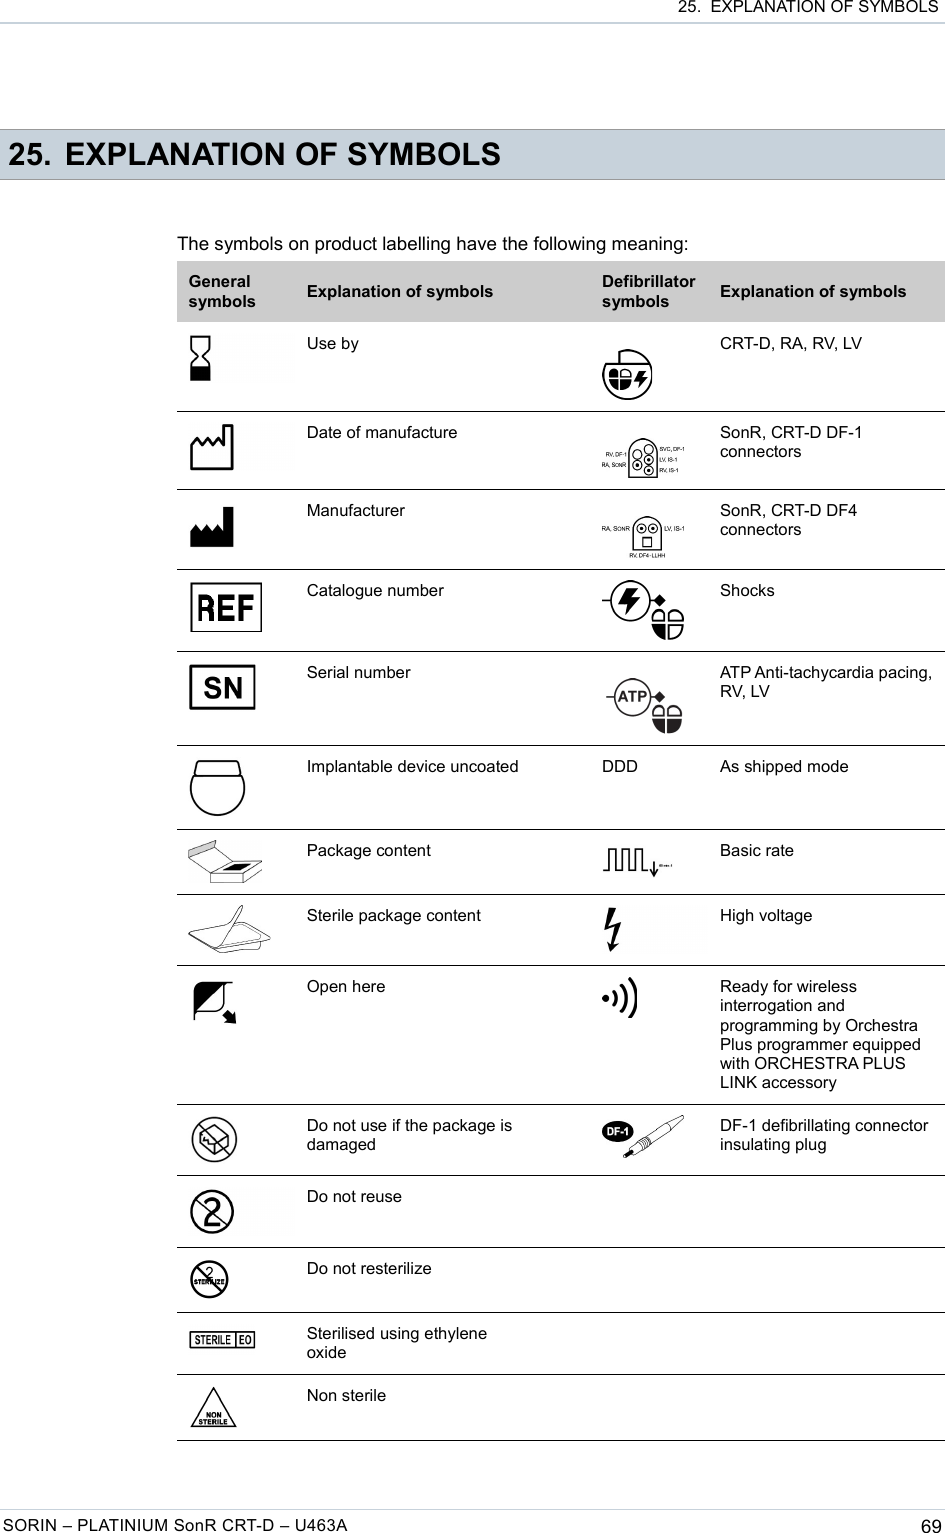  25.  EXPLANATION OF SYMBOLS 25. EXPLANATION OF SYMBOLSThe symbols on product labelling have the following meaning:General symbols Explanation of symbols Defibrillator symbols Explanation of symbolsUse by   CRT-D, RA, RV, LVDate of manufacture   SonR, CRT-D DF-1 connectorsManufacturer   SonR, CRT-D DF4 connectorsCatalogue number ShocksSerial number   ATP Anti-tachycardia pacing, RV, LVImplantable device uncoated DDD As shipped modePackage content Basic rateSterile package content High voltageOpen here Ready for wireless interrogation and programming by Orchestra Plus programmer equipped with ORCHESTRA PLUS LINK accessoryDo not use if the package is damagedDF-1 defibrillating connector insulating plugDo not reuseDo not resterilizeSterilised using ethylene oxideNon sterileSORIN – PLATINIUM SonR CRT-D – U463A 69